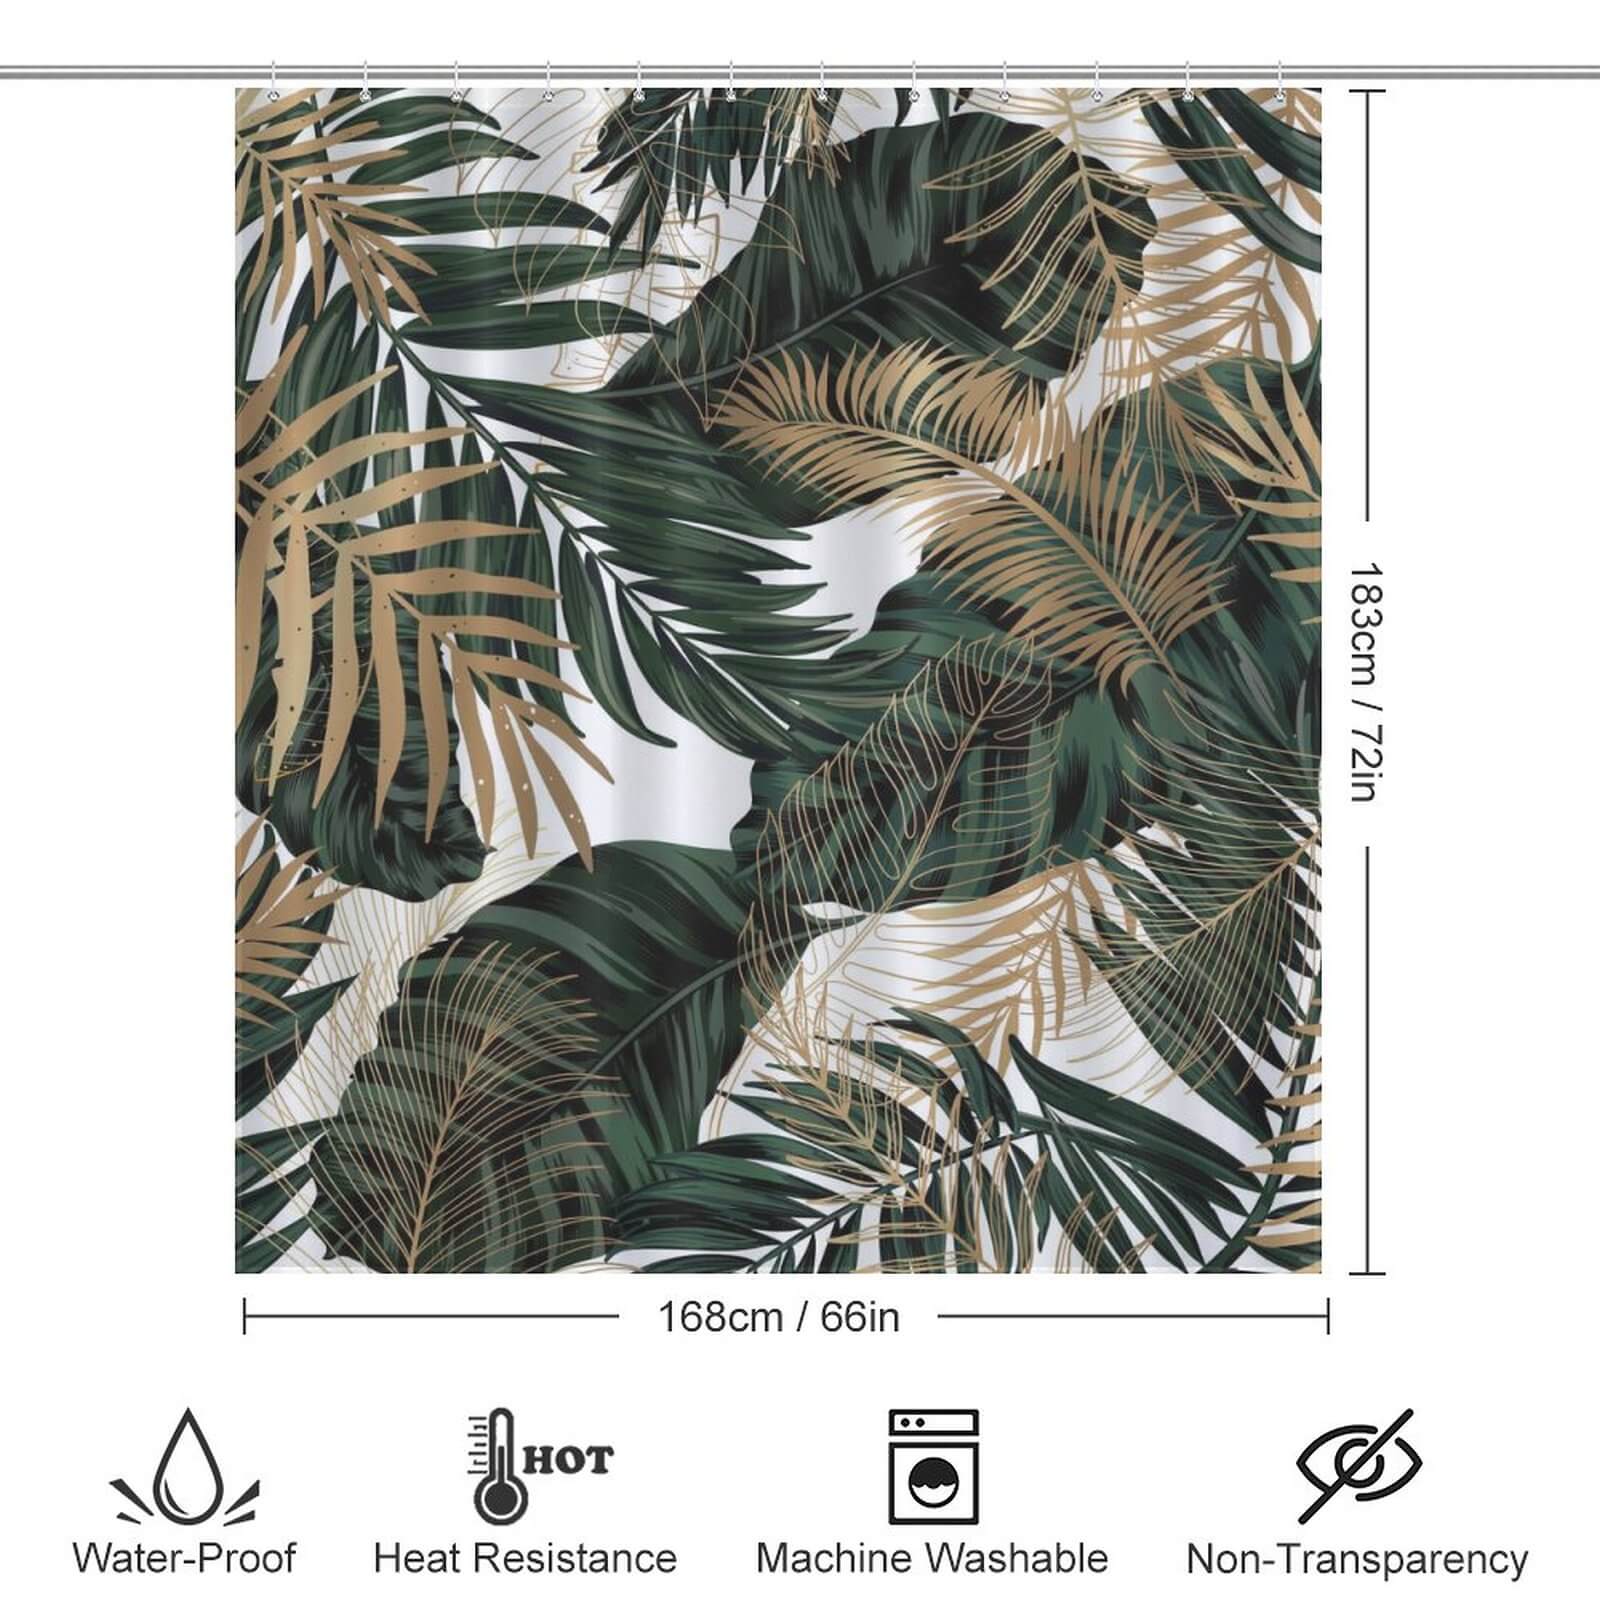 A waterproof Tropical Leaves Jungle shower curtain with measurements, perfect for bathroom decor from Cotton Cat.